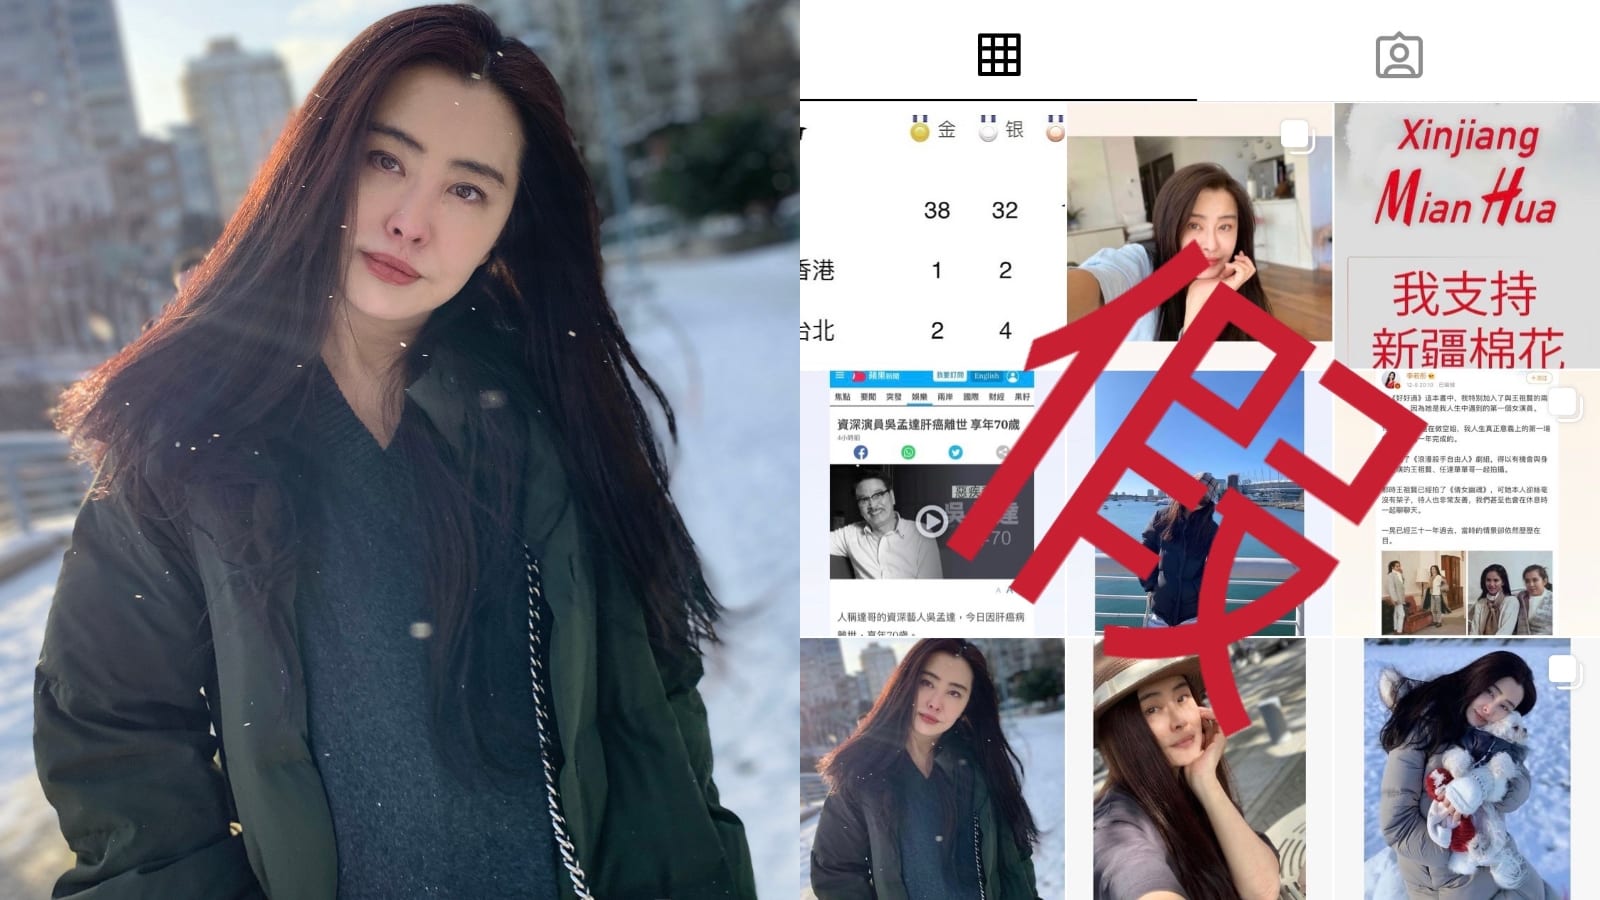 Joey Wong Confirms Controversial IG Account Is Fake; May Take Legal Action Against Impersonators